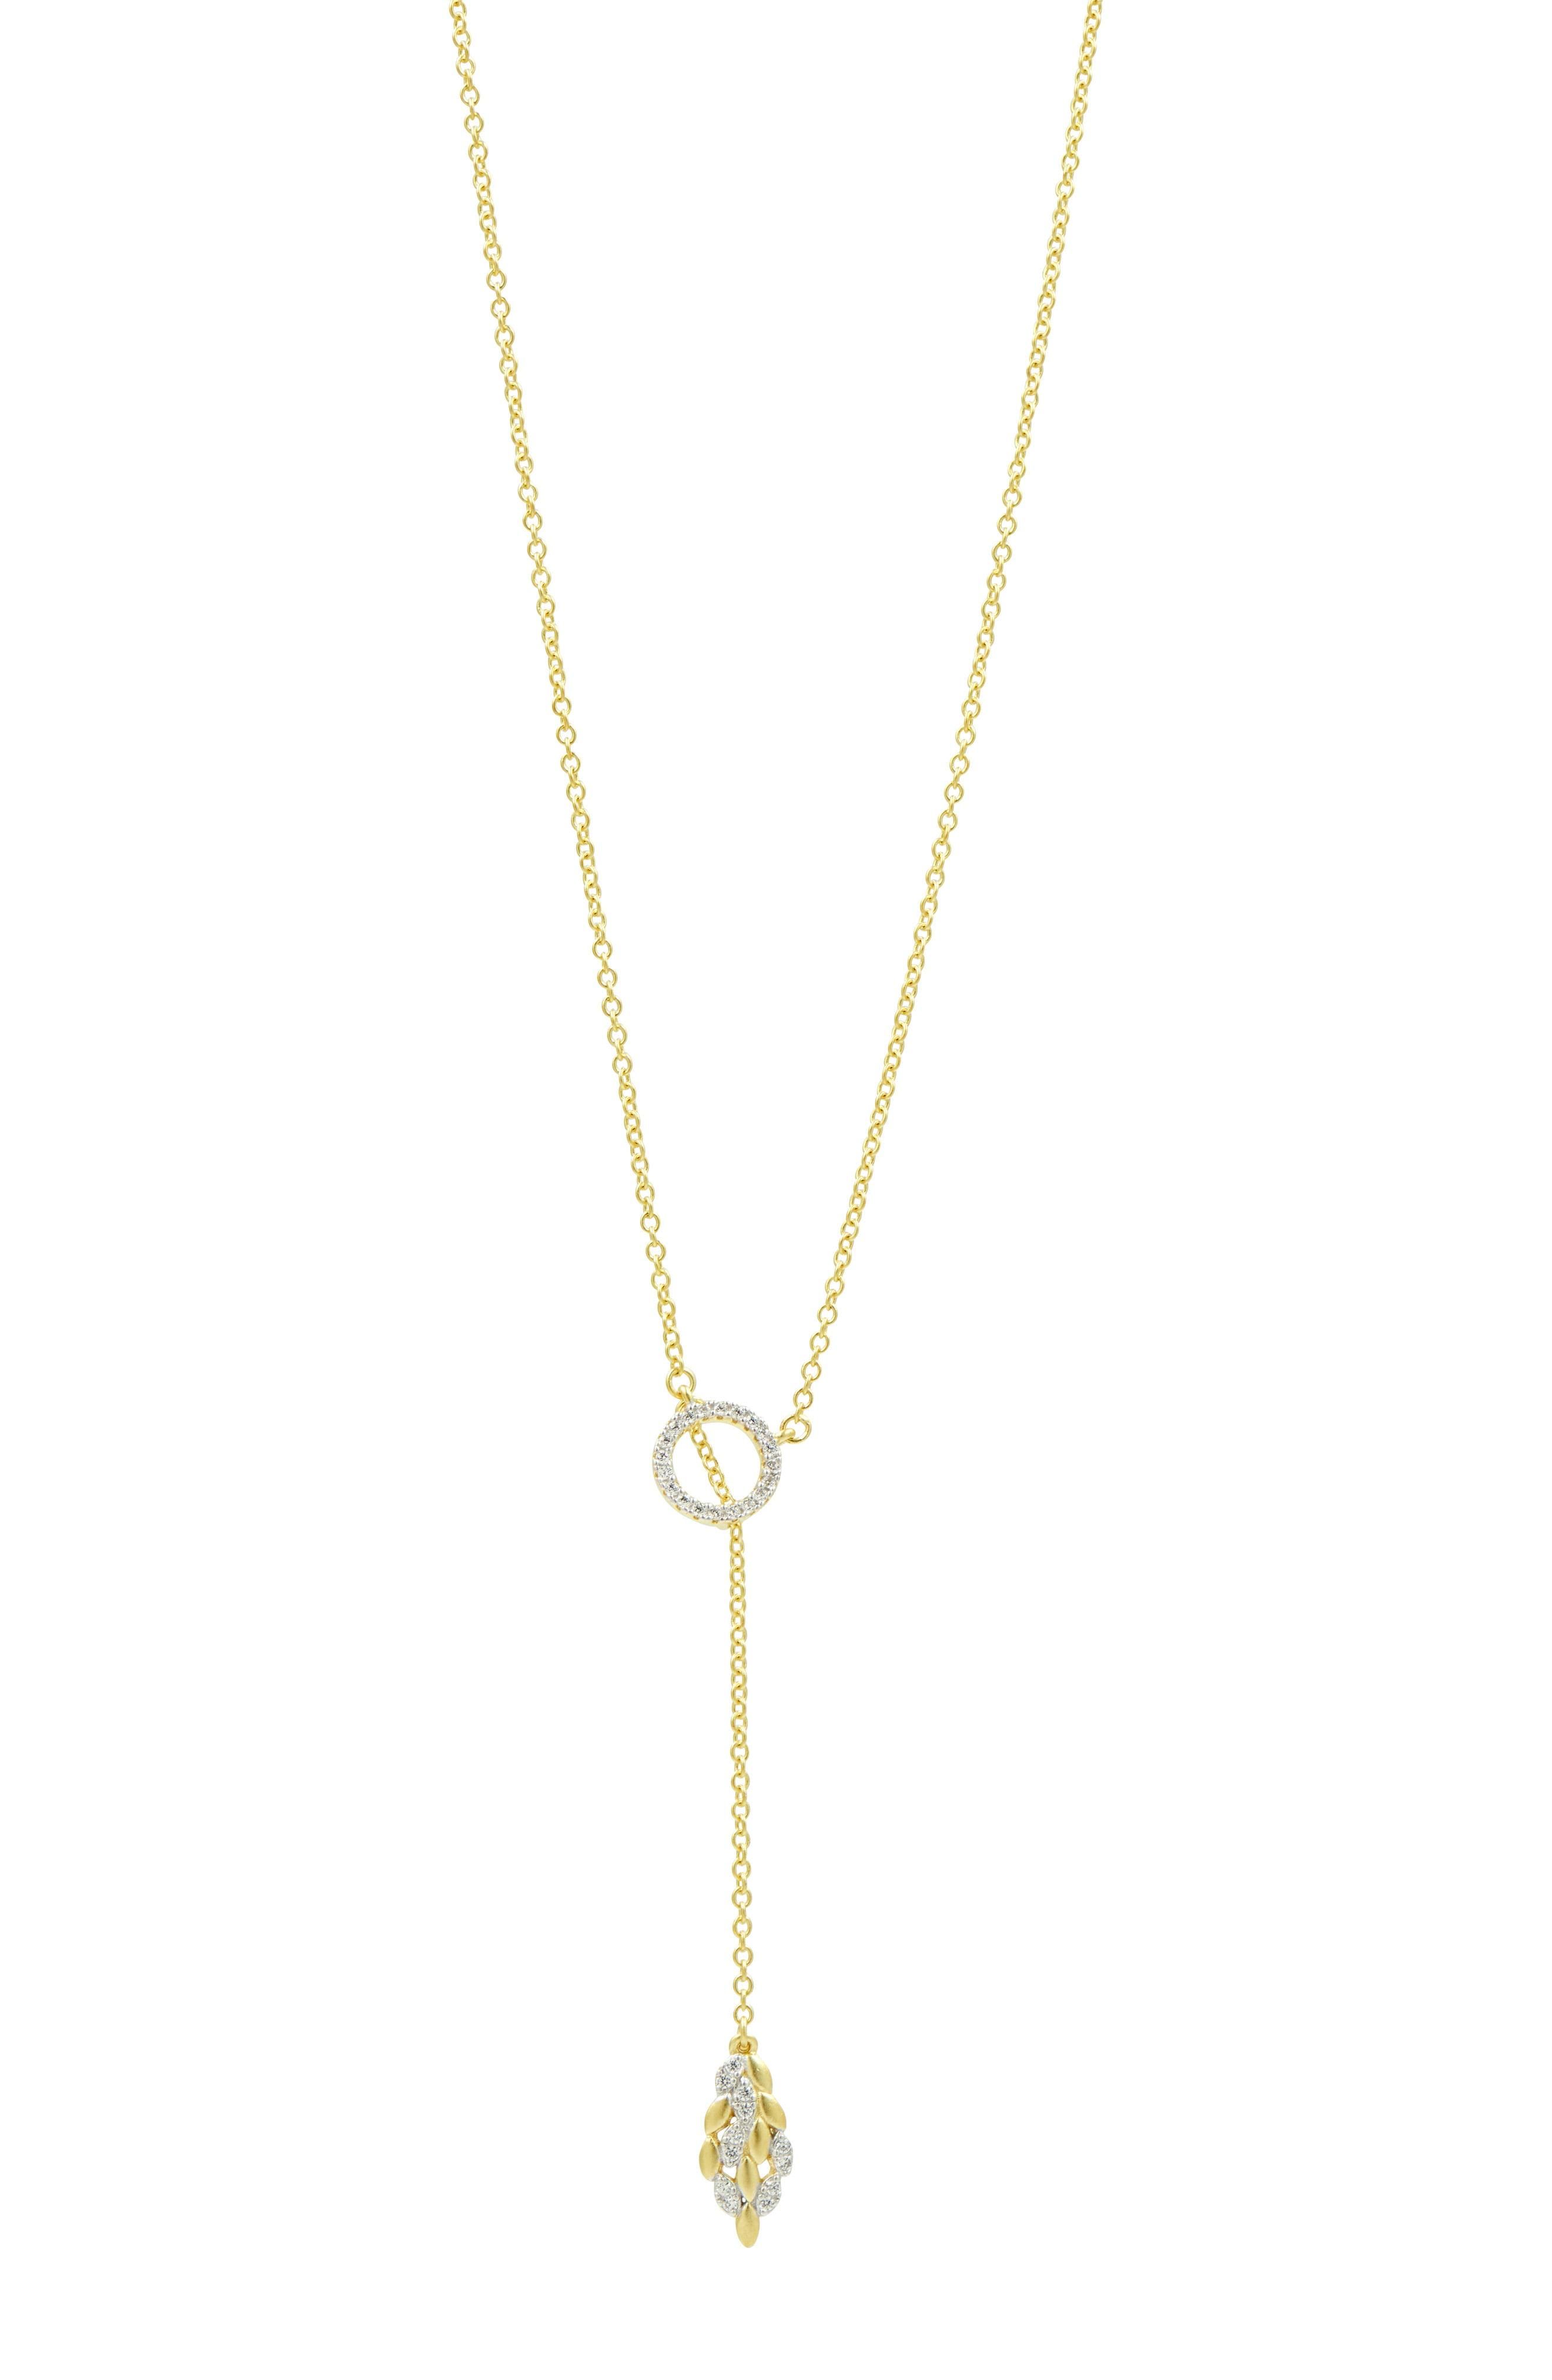 Lyst – Freida Rothman Fleur Bloom Lariat Necklace In Metallic Throughout Most Recently Released Glorious Bloom Pendant Necklaces (View 23 of 25)